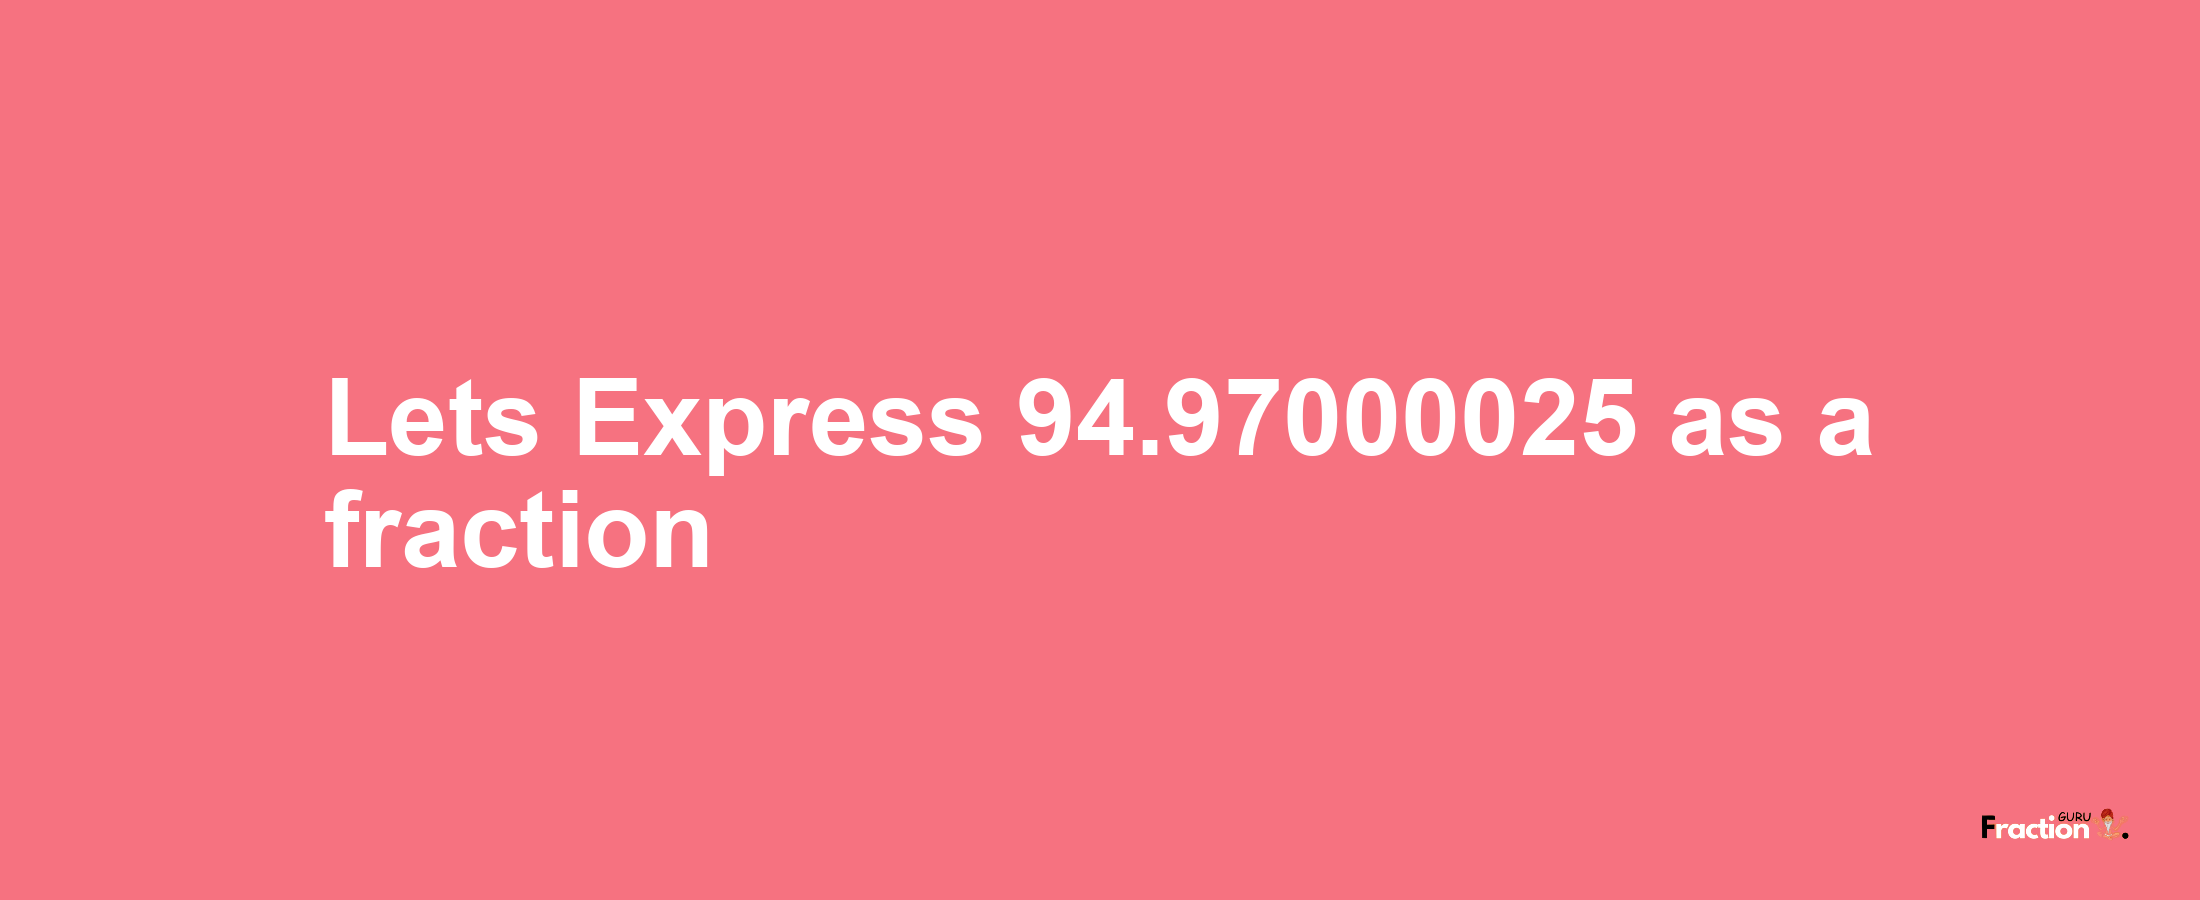 Lets Express 94.97000025 as afraction